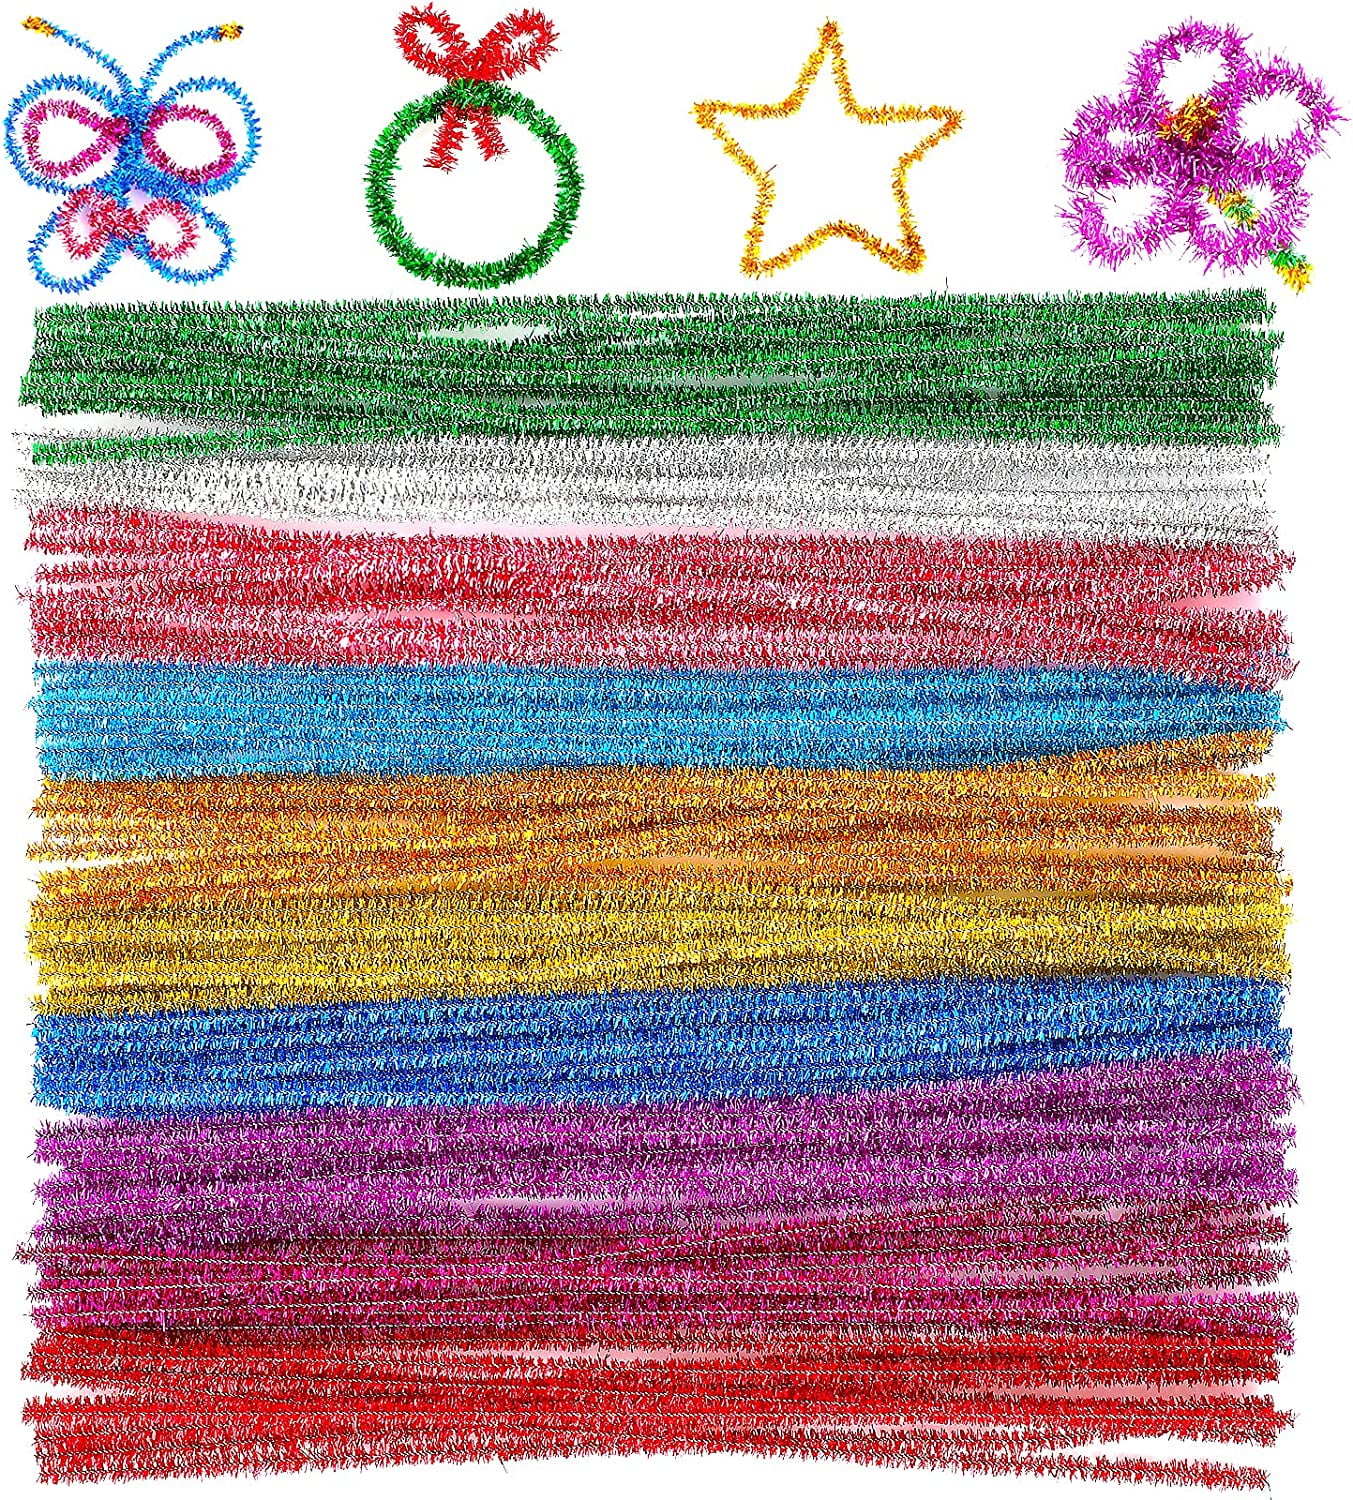 100Pcs Sparkly Pipe Cleaners Tinsel Pipe Cleaner Bulk Chenille Stems  Glitter Pipe Cleaners for Kids Craft Art DIY(6mm x 12inch, 10 Colors)